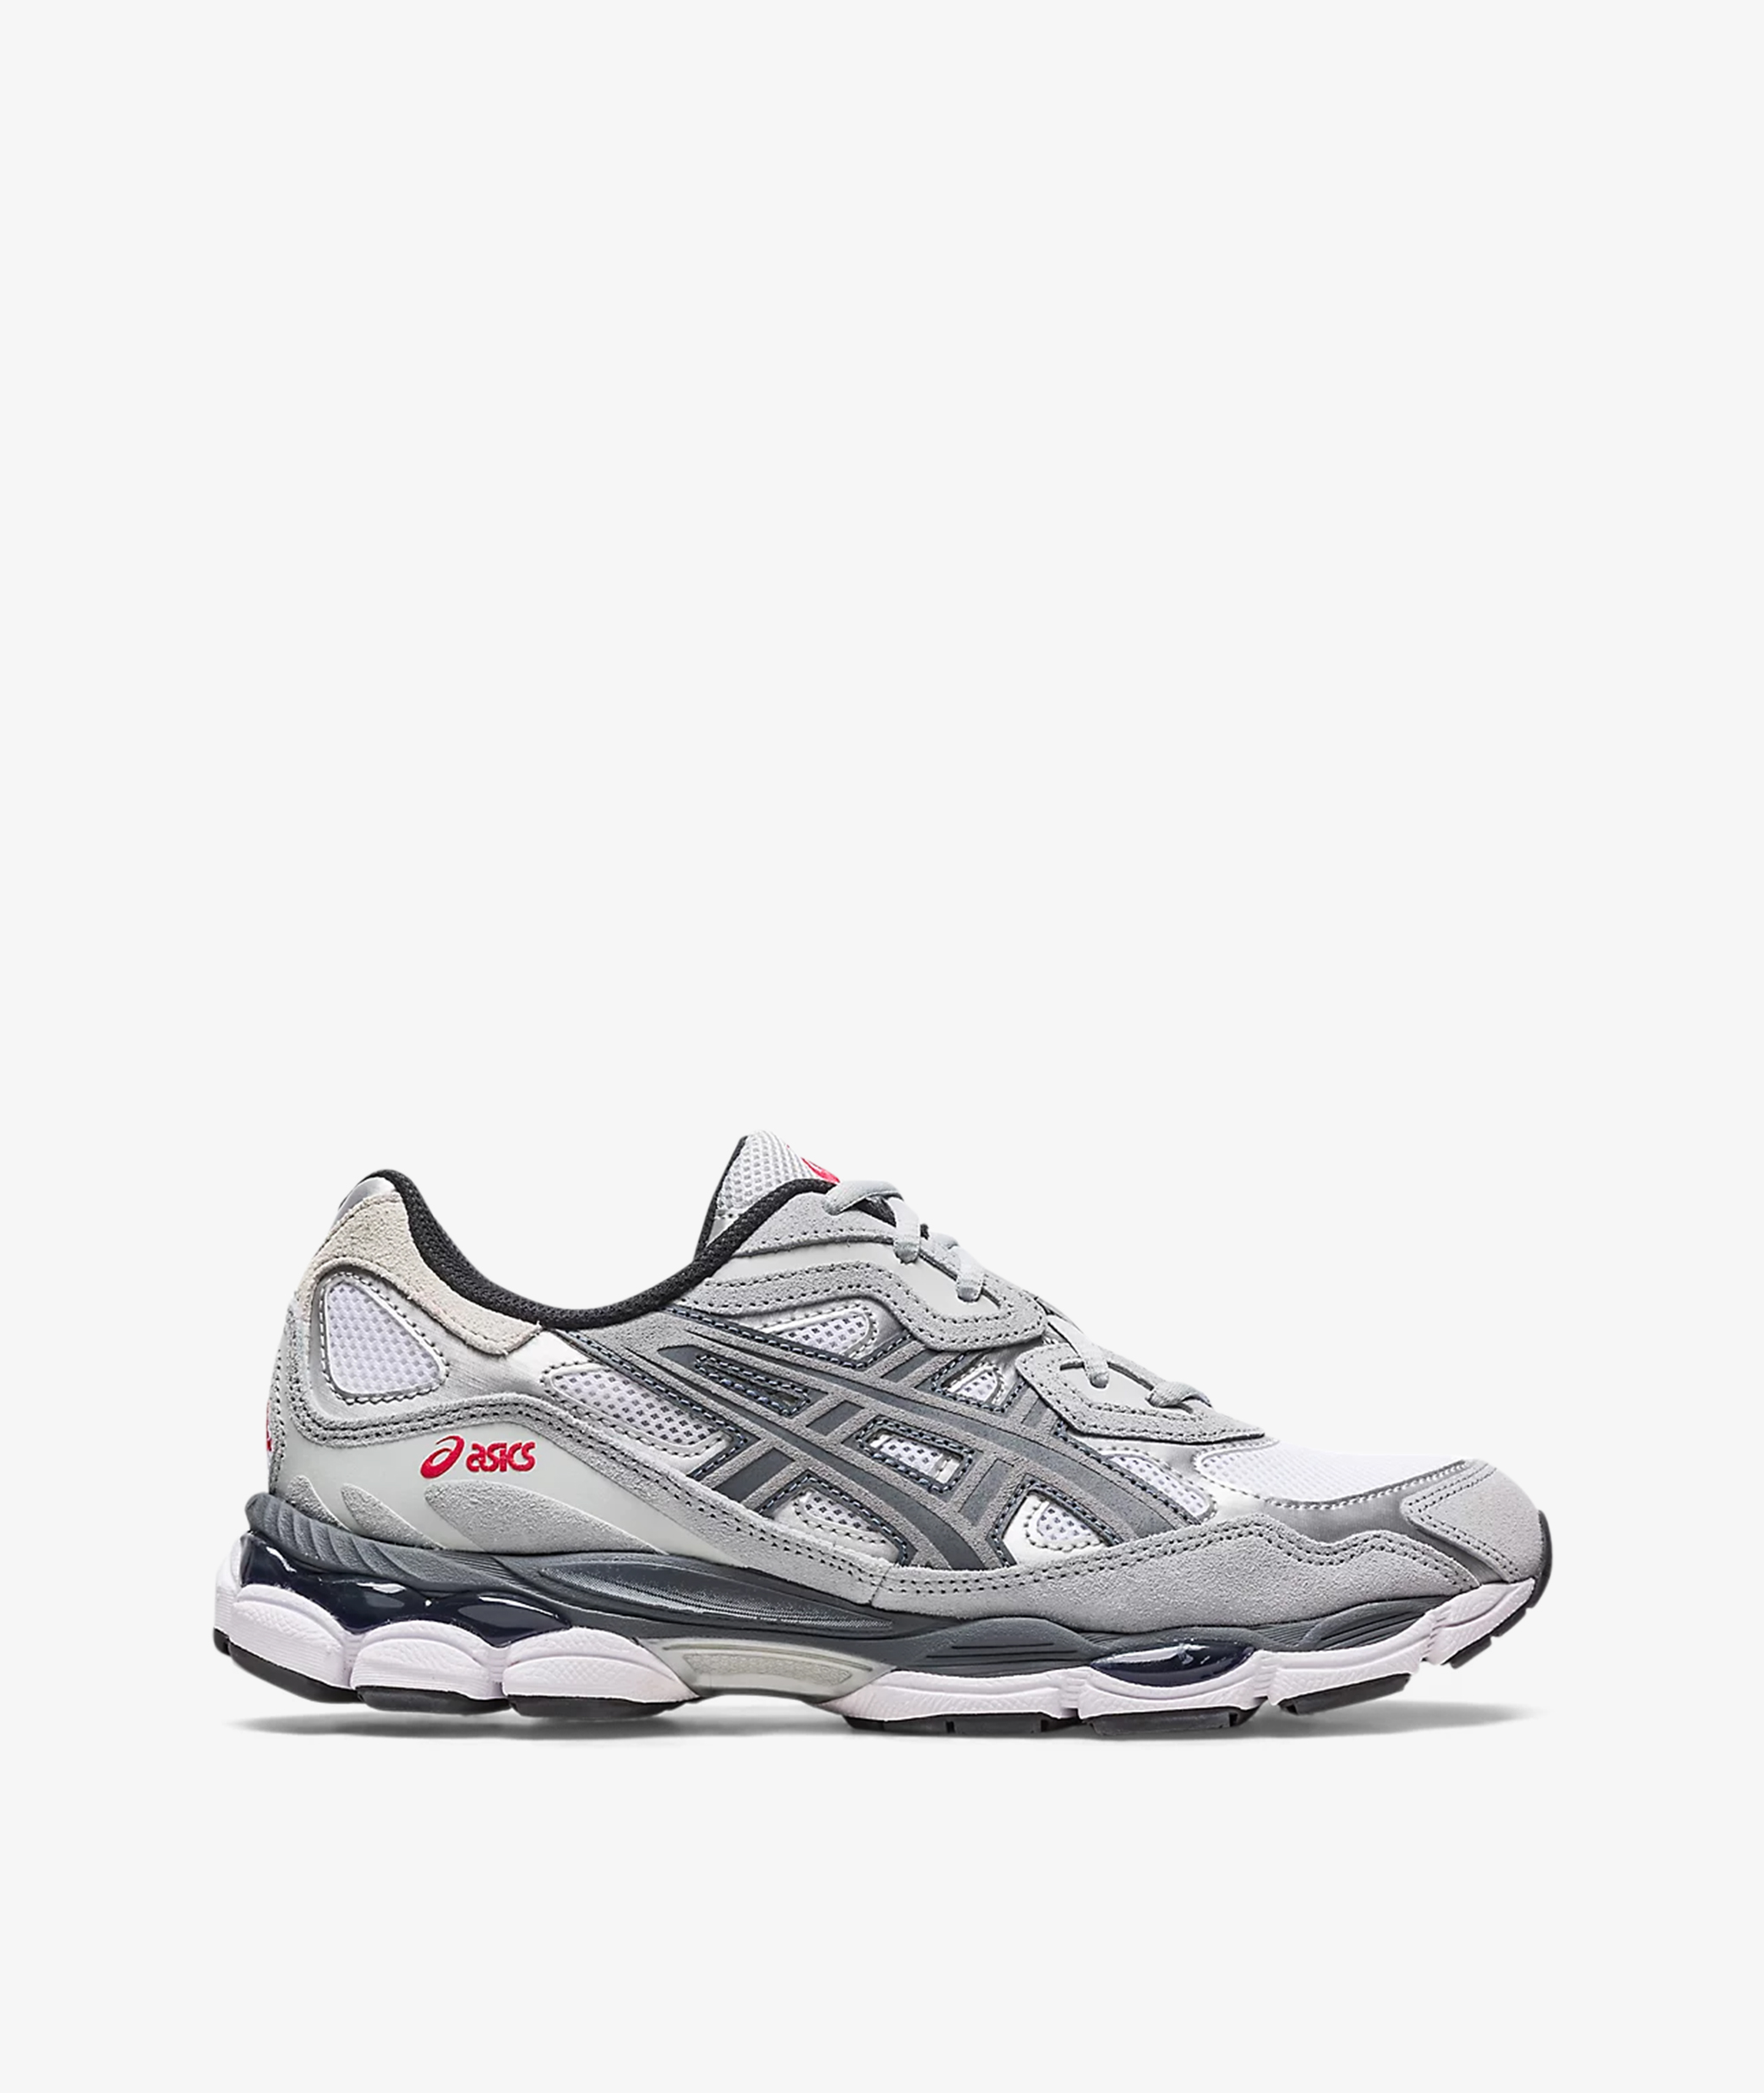 Norse Store | Shipping Worldwide - Asics GEL-NYC - White/Steel Grey